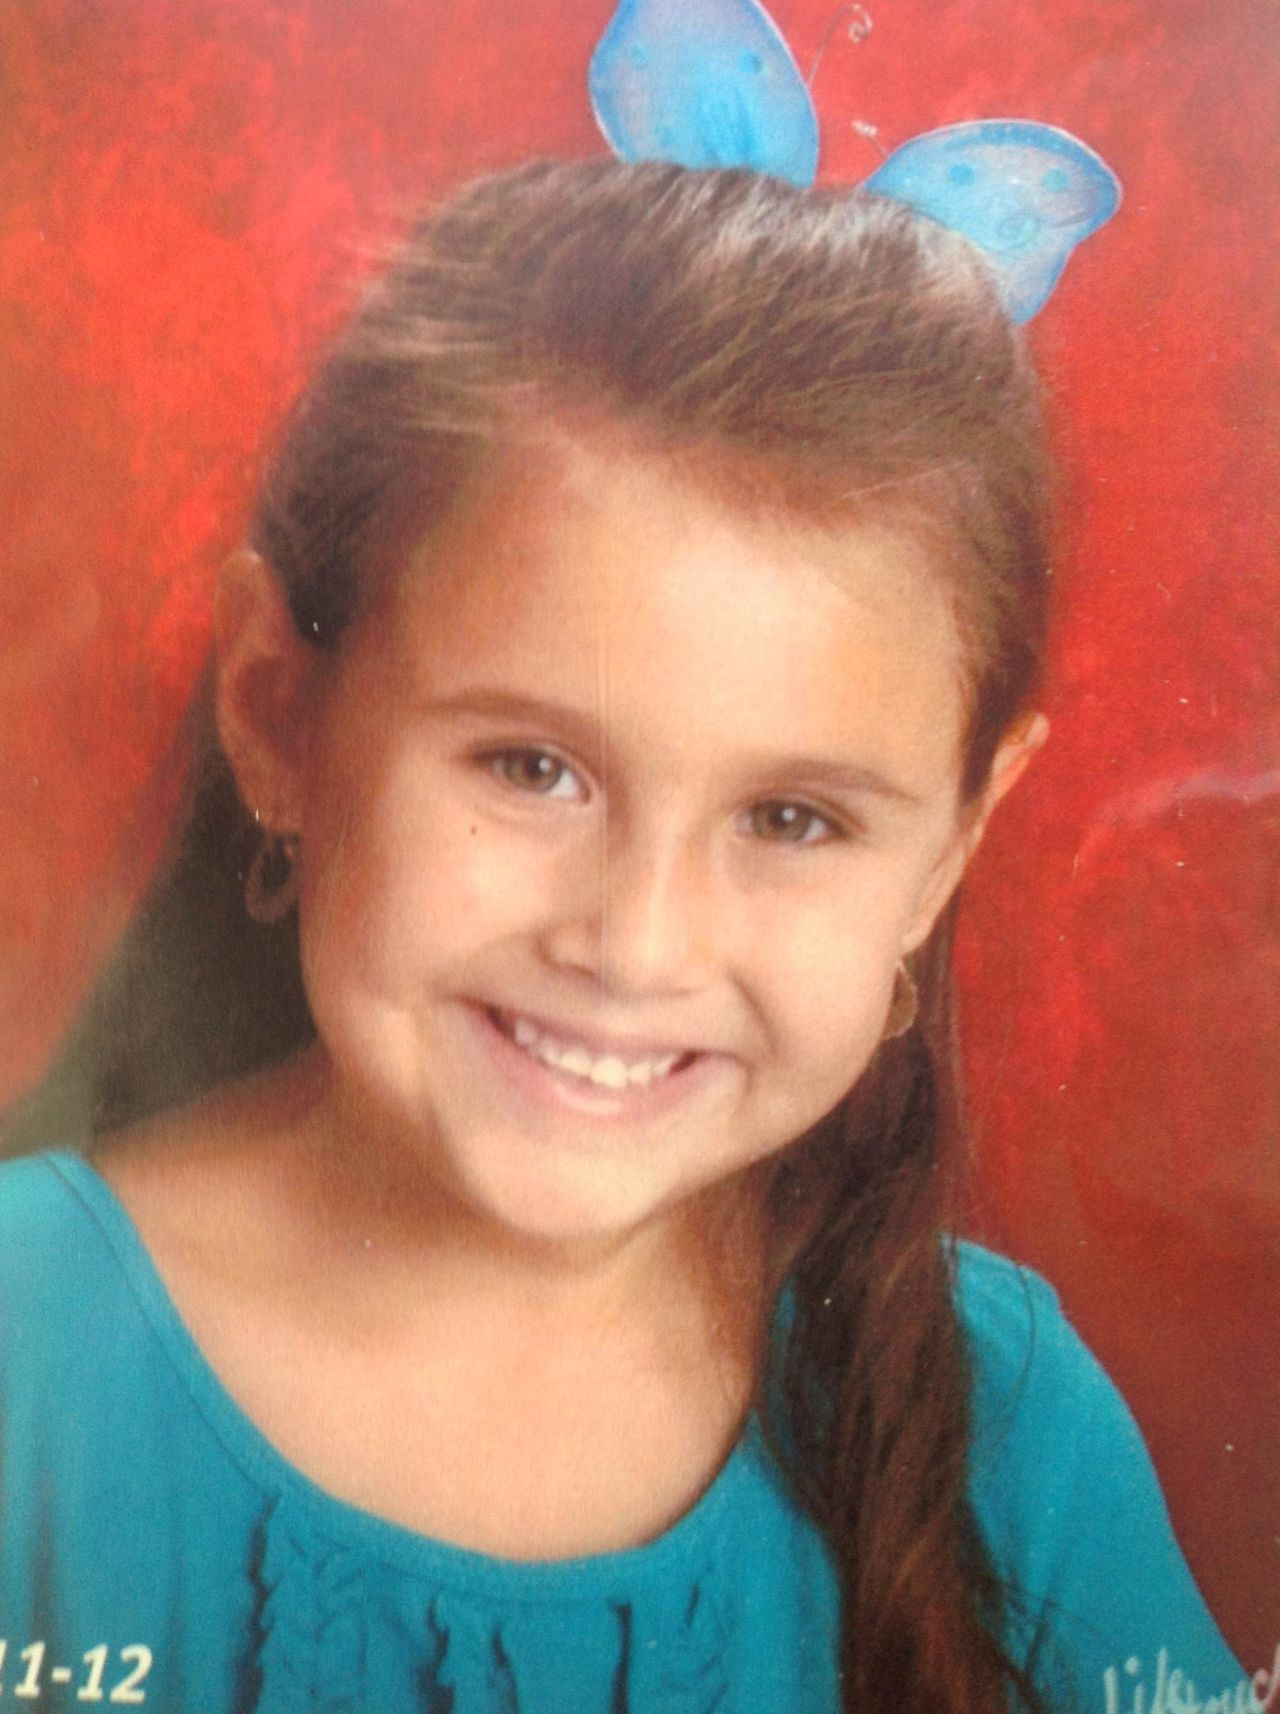 Six-year-old Isabel Celis's parents reported her missing in April 2012, telling Tucson, Arizona, police that she vanished from her room in the middle of the night. There are no suspects in her disappearance.